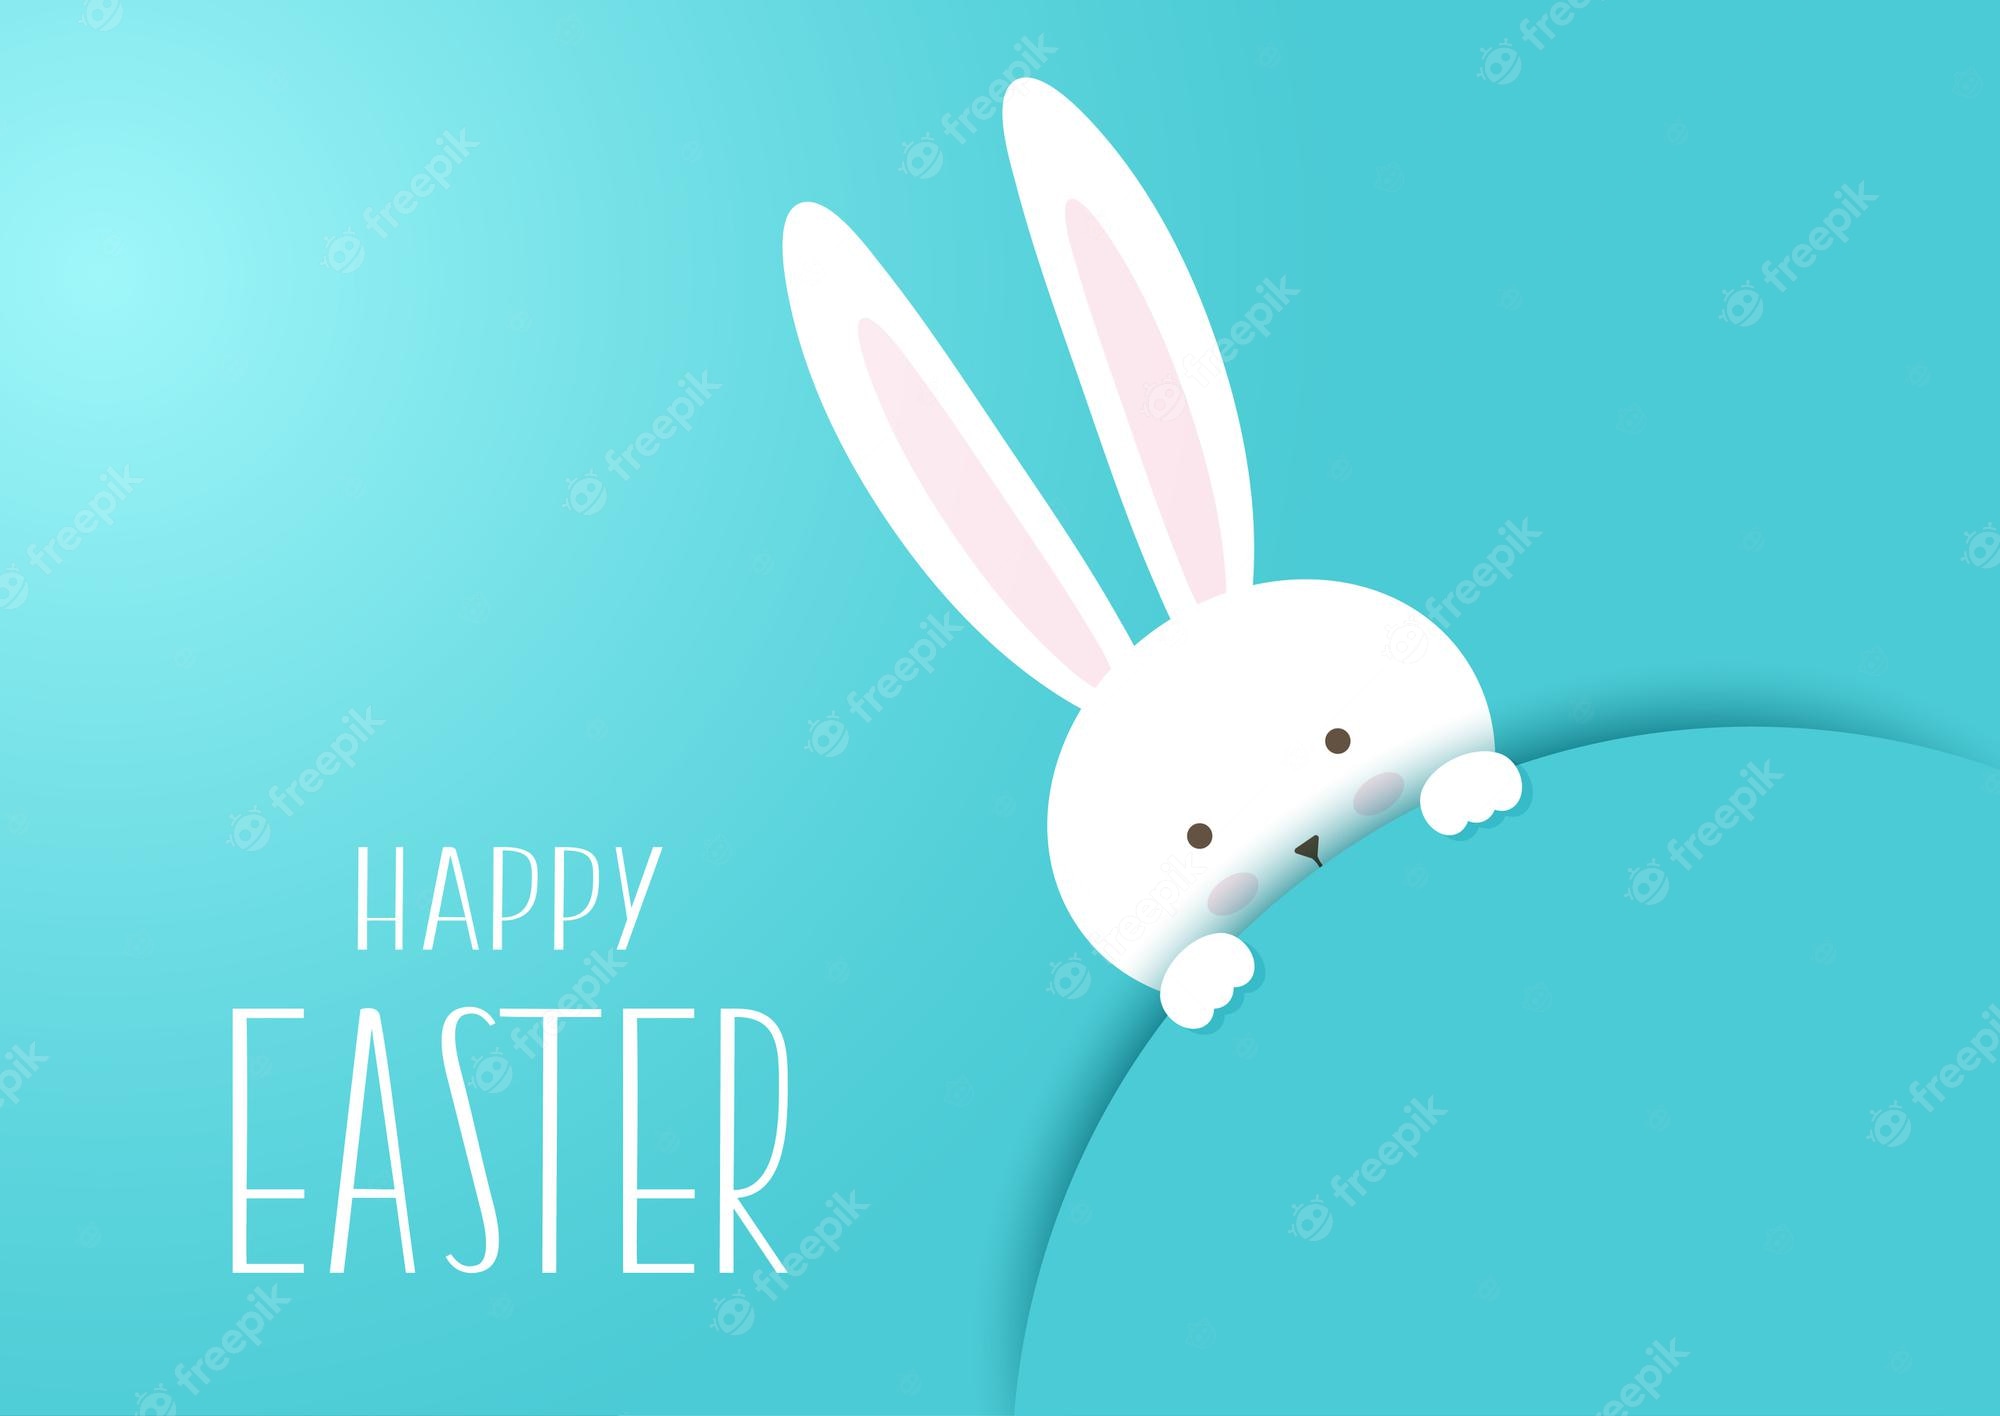 Happy Easter Image